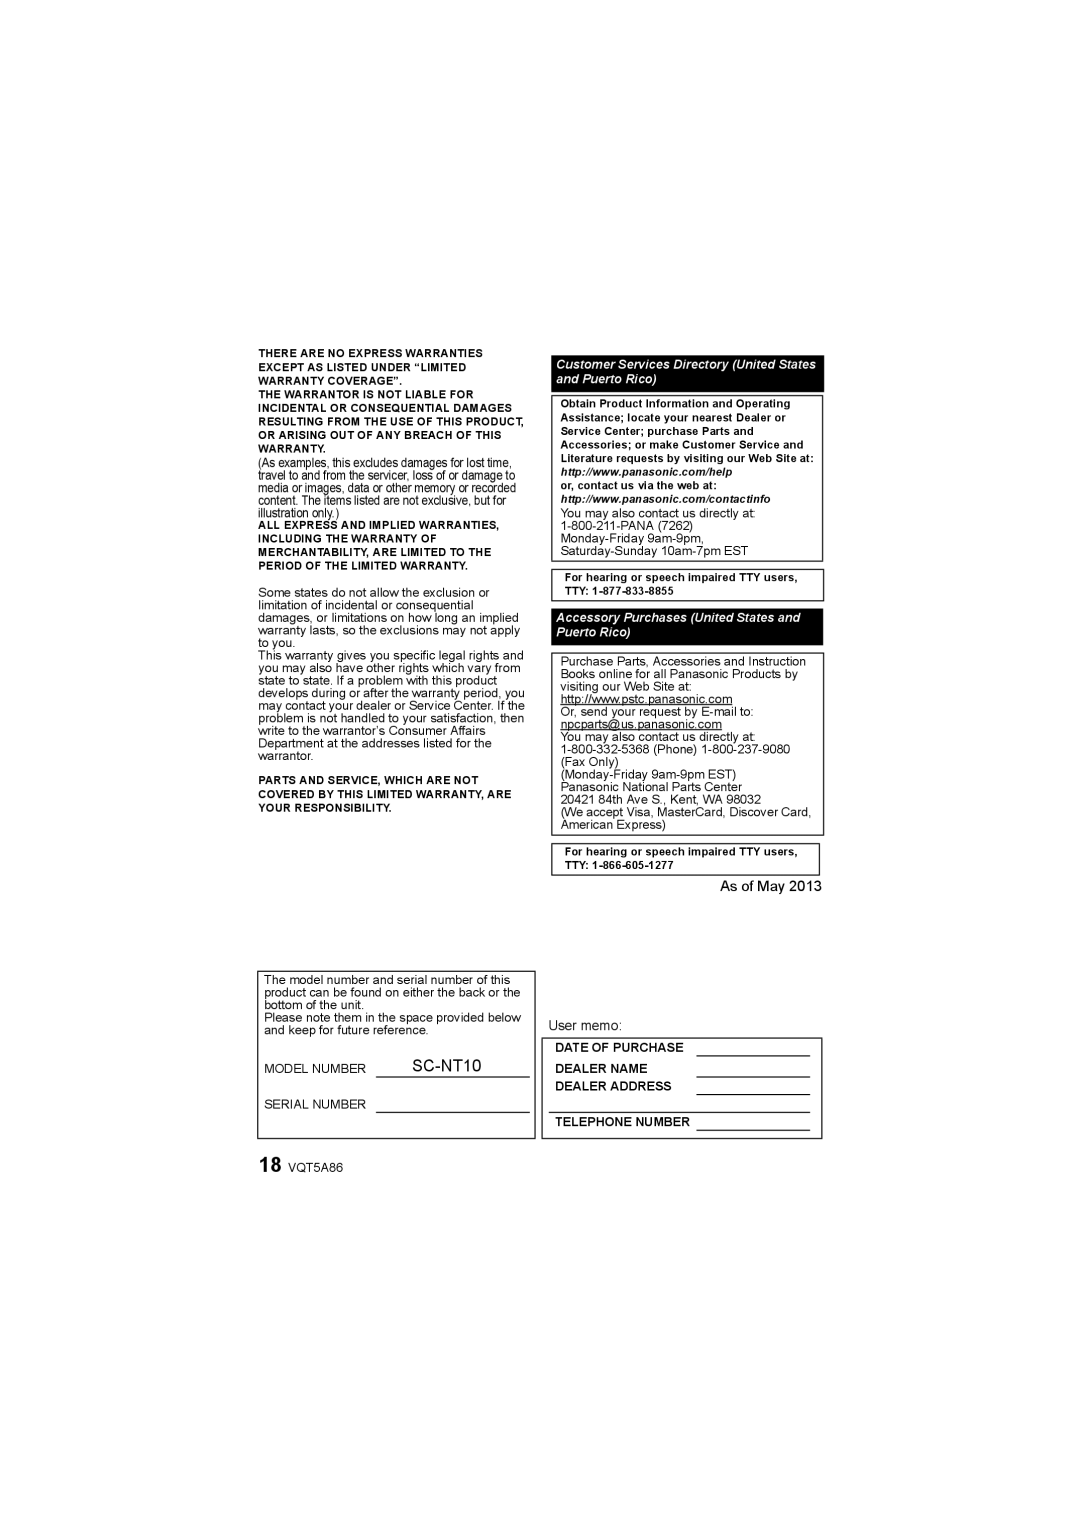 Panasonic SC-NT10 owner manual As of May User memo, Accessory Purchases United States and Puerto Rico 